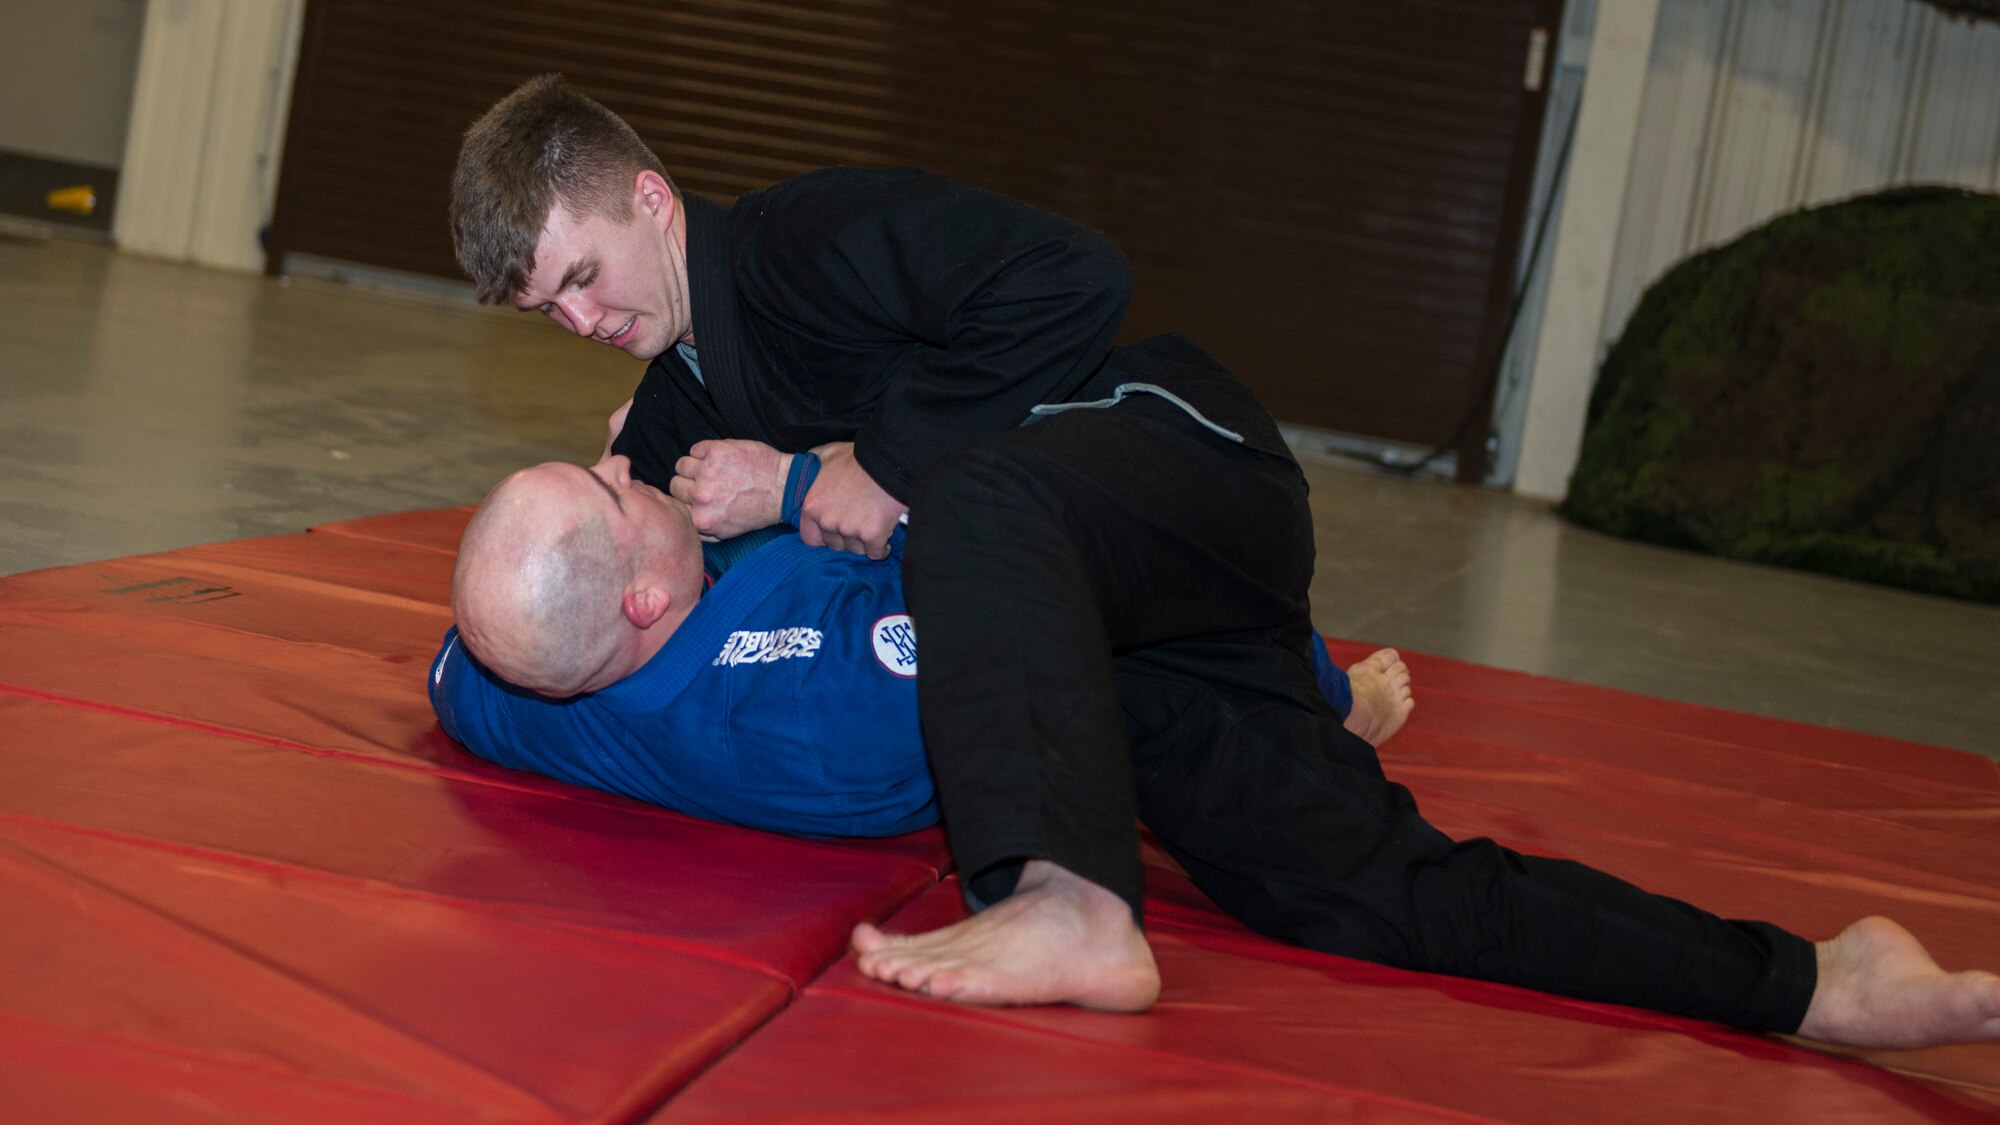 U.S. Air Force Staff Sgt. Chad Jarvis (right), a Security Forces Squadron defender from the 103rd Airlift Wing, Connecticut Air National Guard, grapples with Tech. Sgt. Michael Stearns, 103rd Security Forces Squadron combat arms noncommissioned officer in charge, during a jiu-jitsu session at Bradley Air National Guard Base, East Granby, Conn. Jan. 23, 2020. The two are part of a group that practices jiu-jitsu at the 103rd AW  to build camaraderie between the members while utilizing combatives skills and outside experience in the martial art. (U.S. Air National Guard photo by Staff Sgt. Steven Tucker)